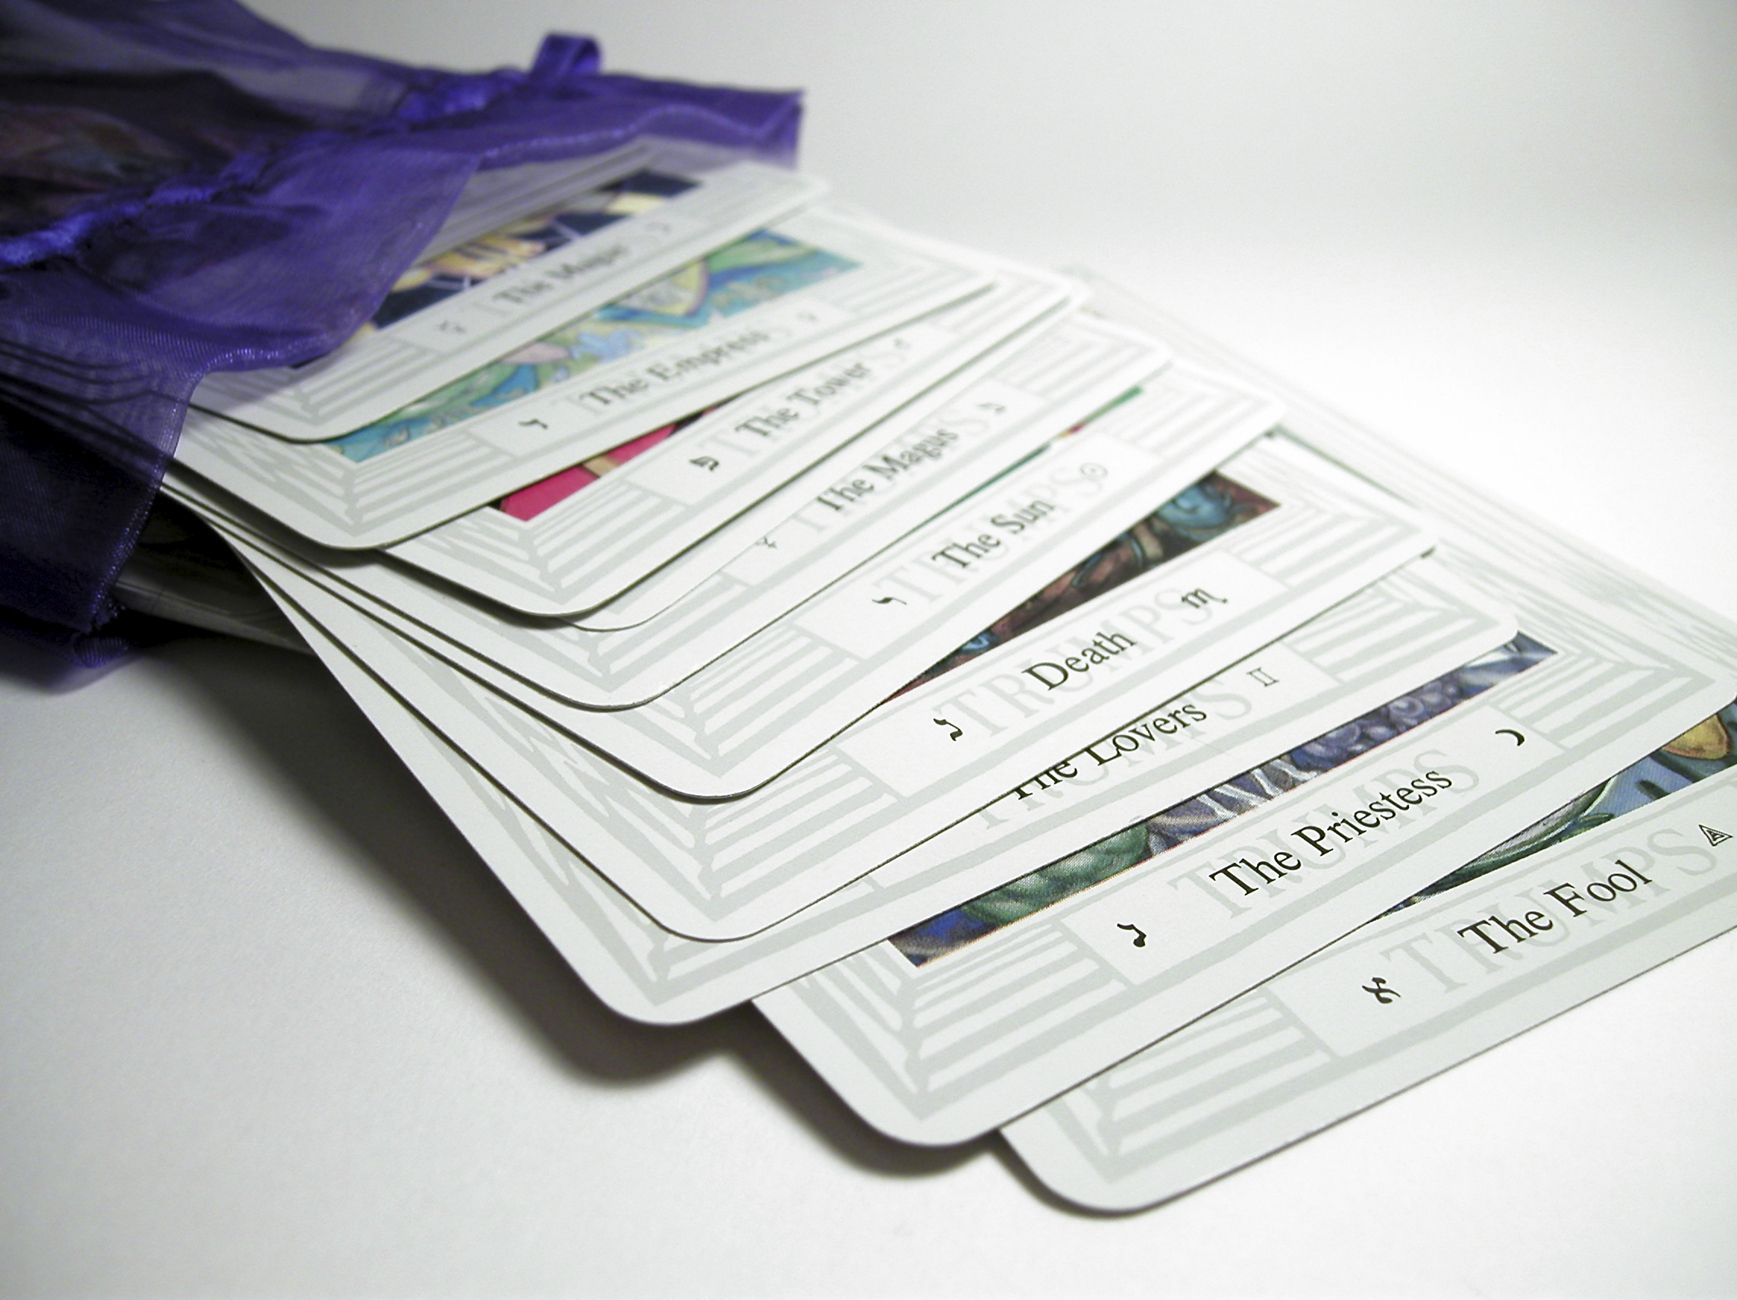 A deck of tarot cards spilling out of a purple cloth case on a white table